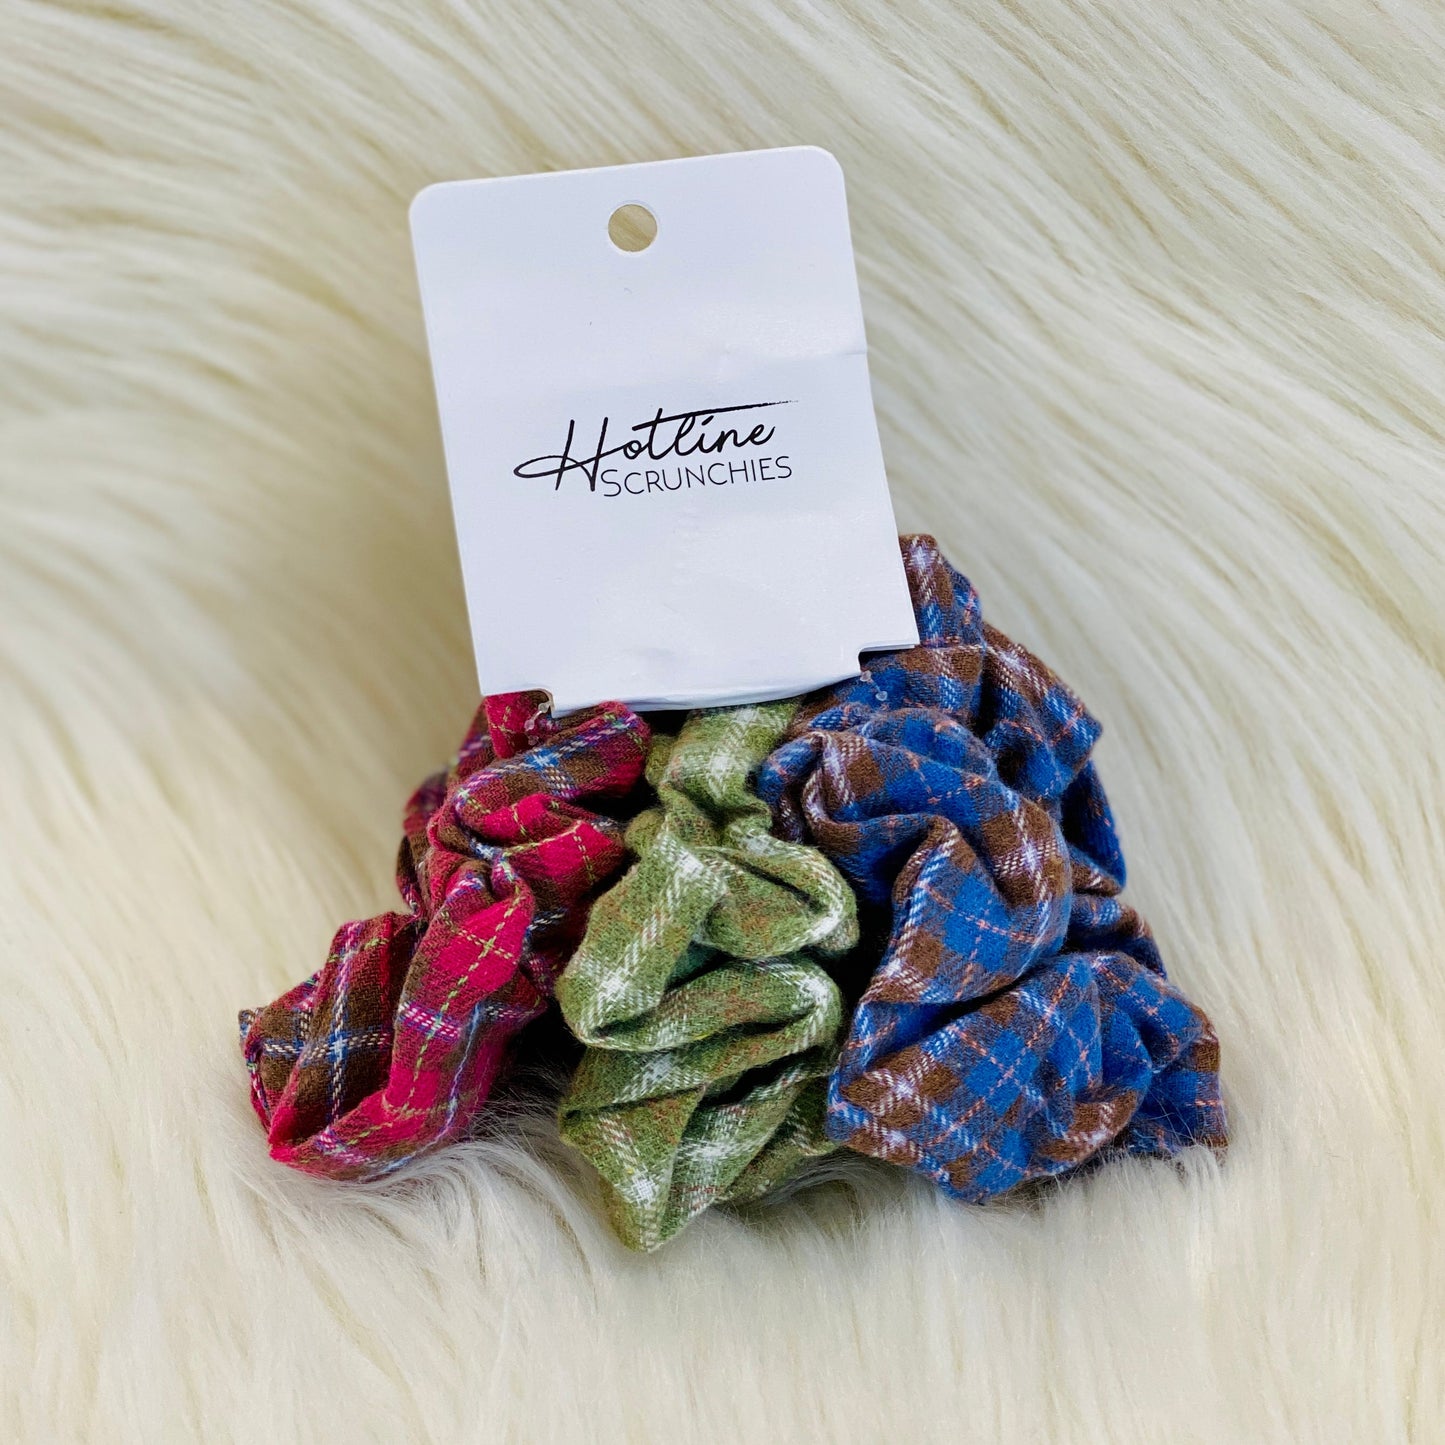 Our Fall Flannel Scrunchie Set has three scrunchies that are different color flannel prints. Perfect to match with your favorite outfit for fall! Also available in our Varsity Flannel Scrunchie Set which has good school spirit flannel print tones.